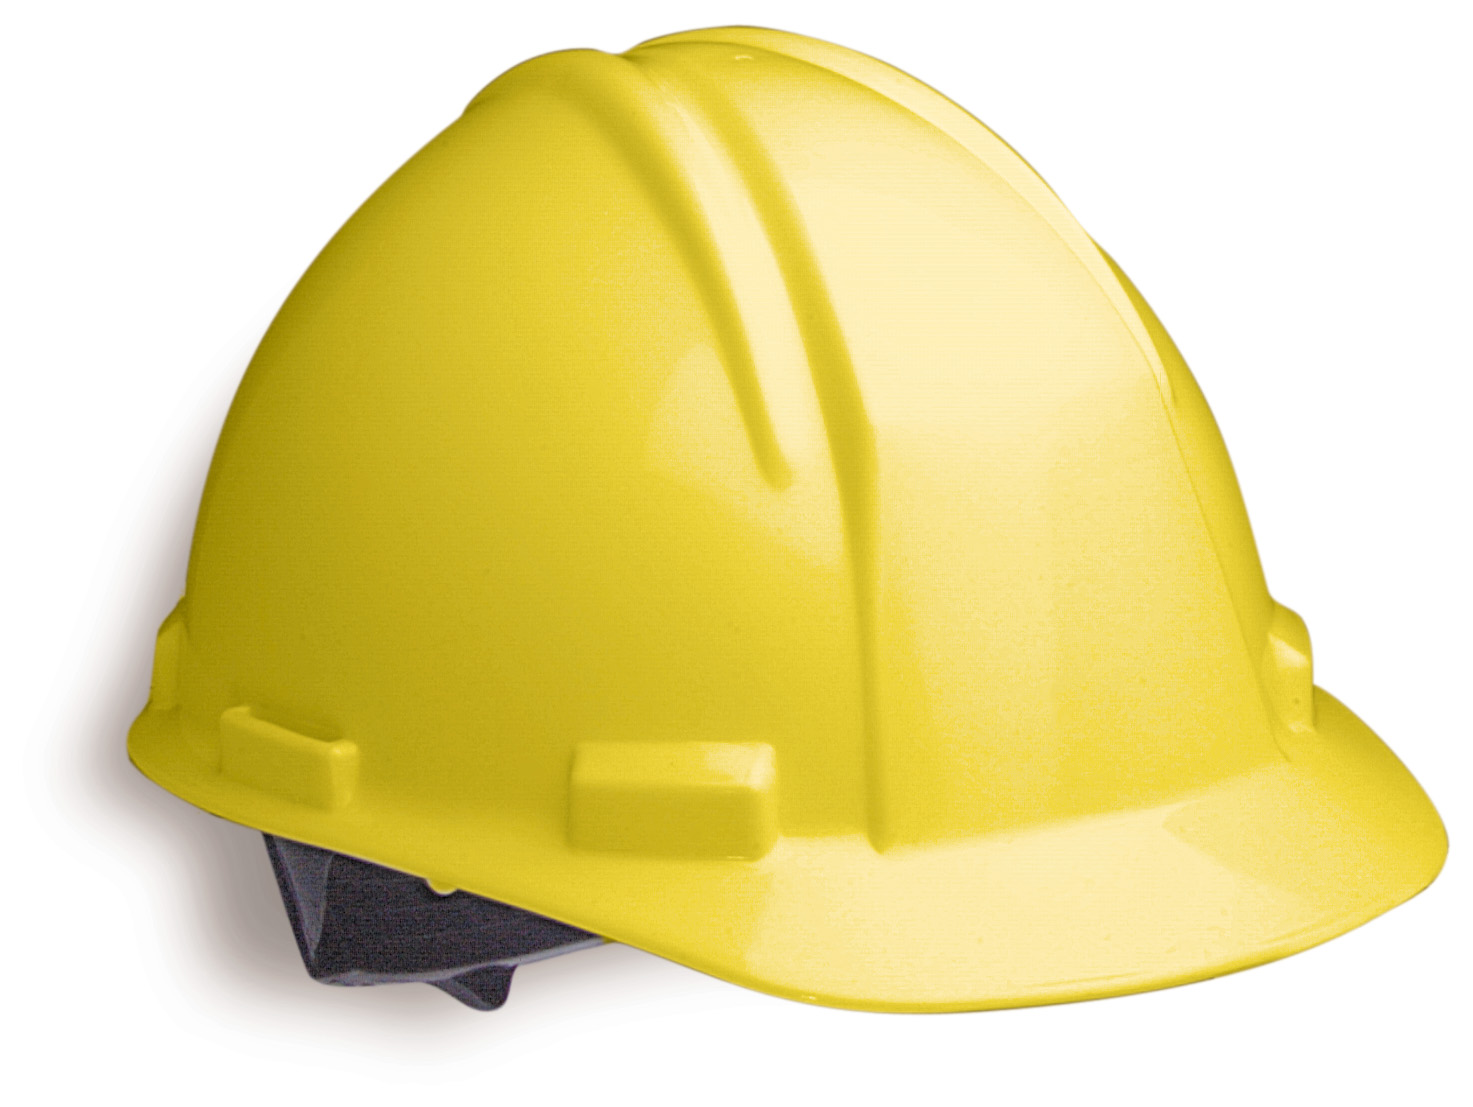 North S K2 Series Hard Hat Saves The Contractor Money Without